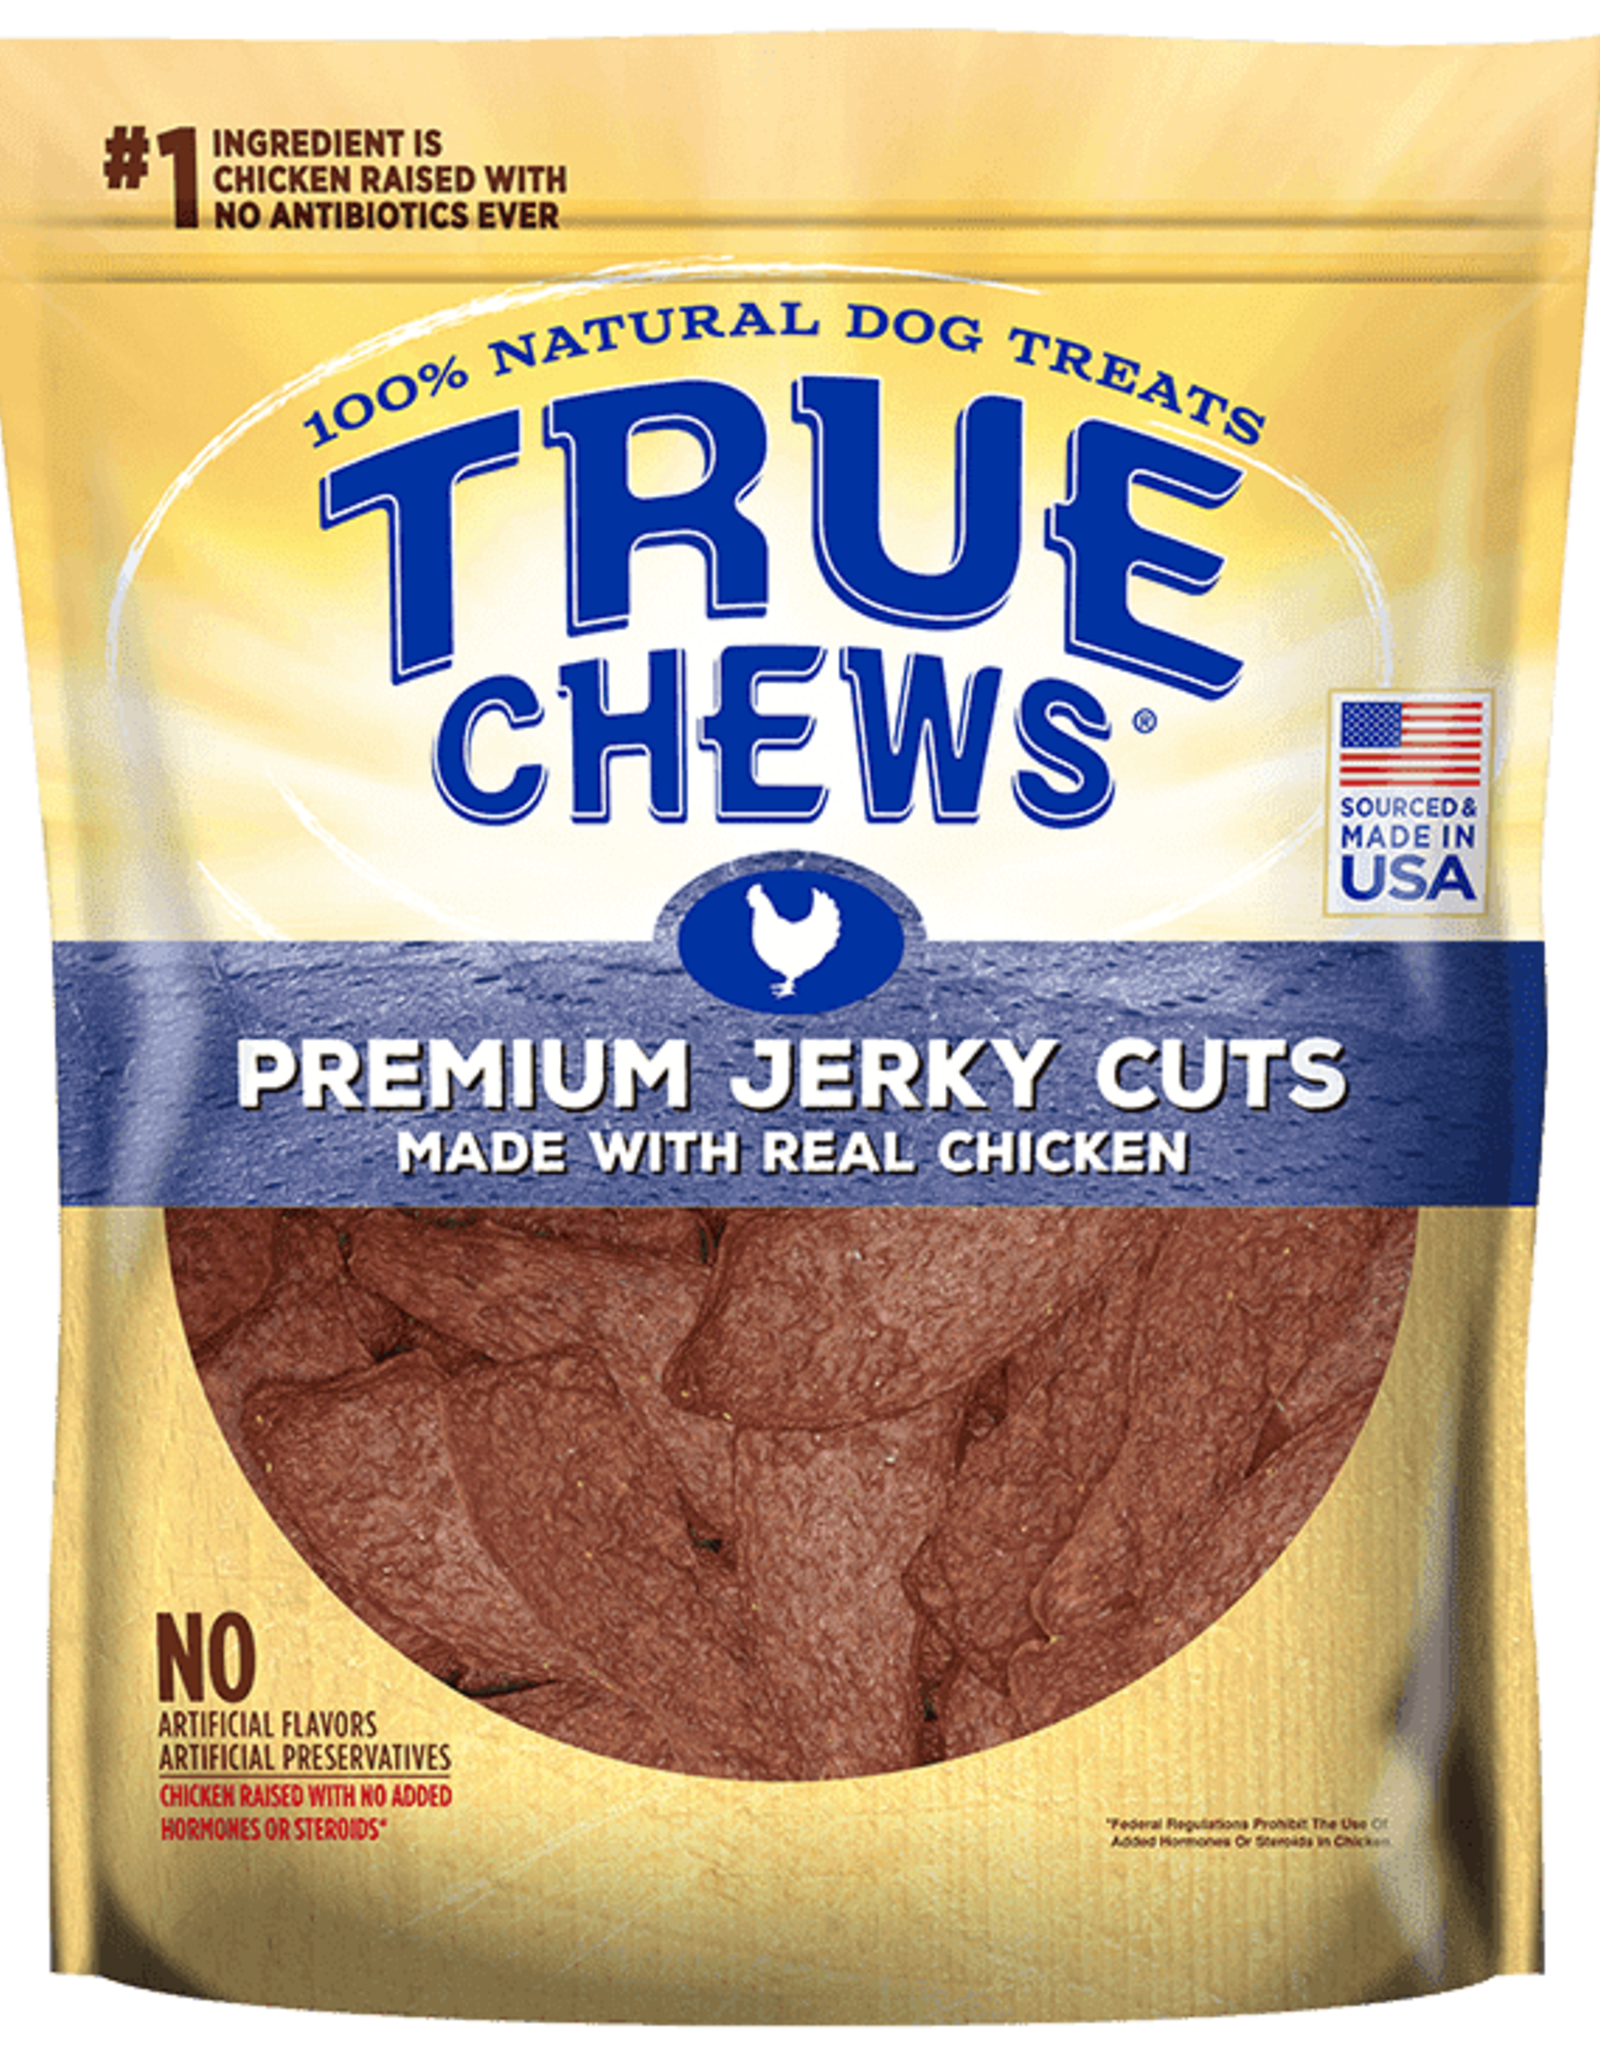 TYSON True Chews® PREMIUM JERKY CUTS MADE WITH REAL CHICKEN